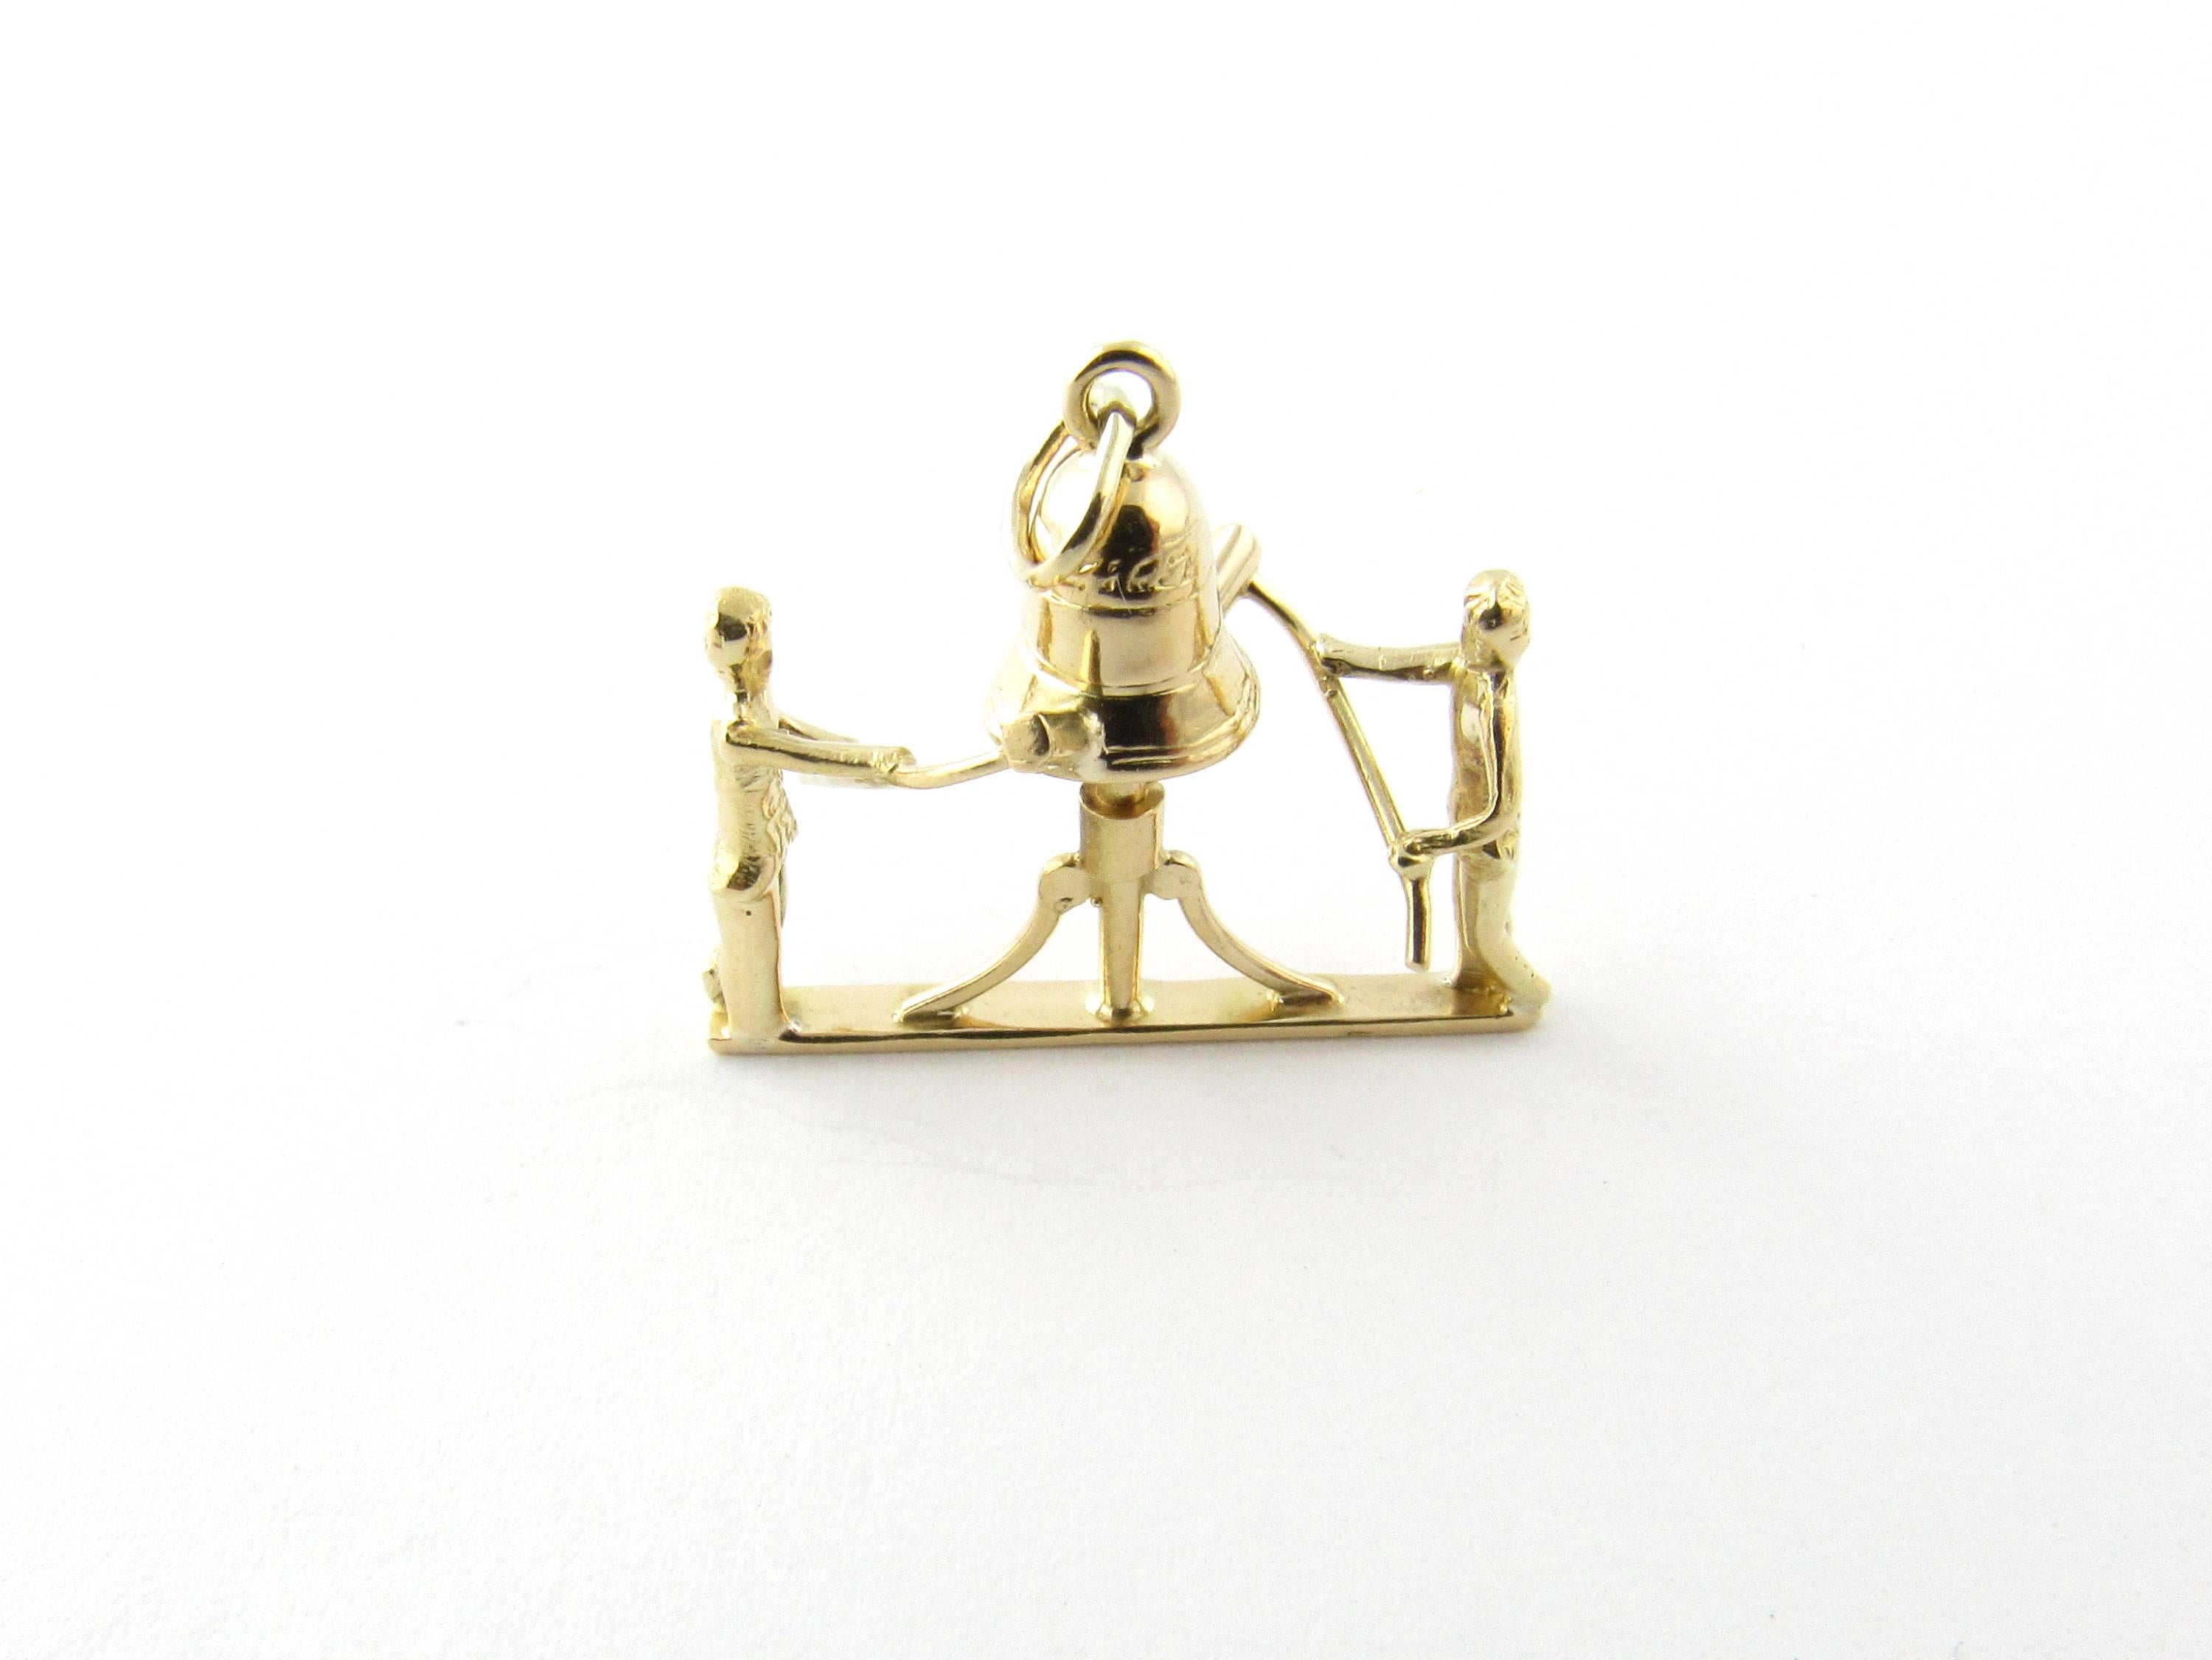 18 Karat Yellow Gold Church Bell with Ringers Charm 1